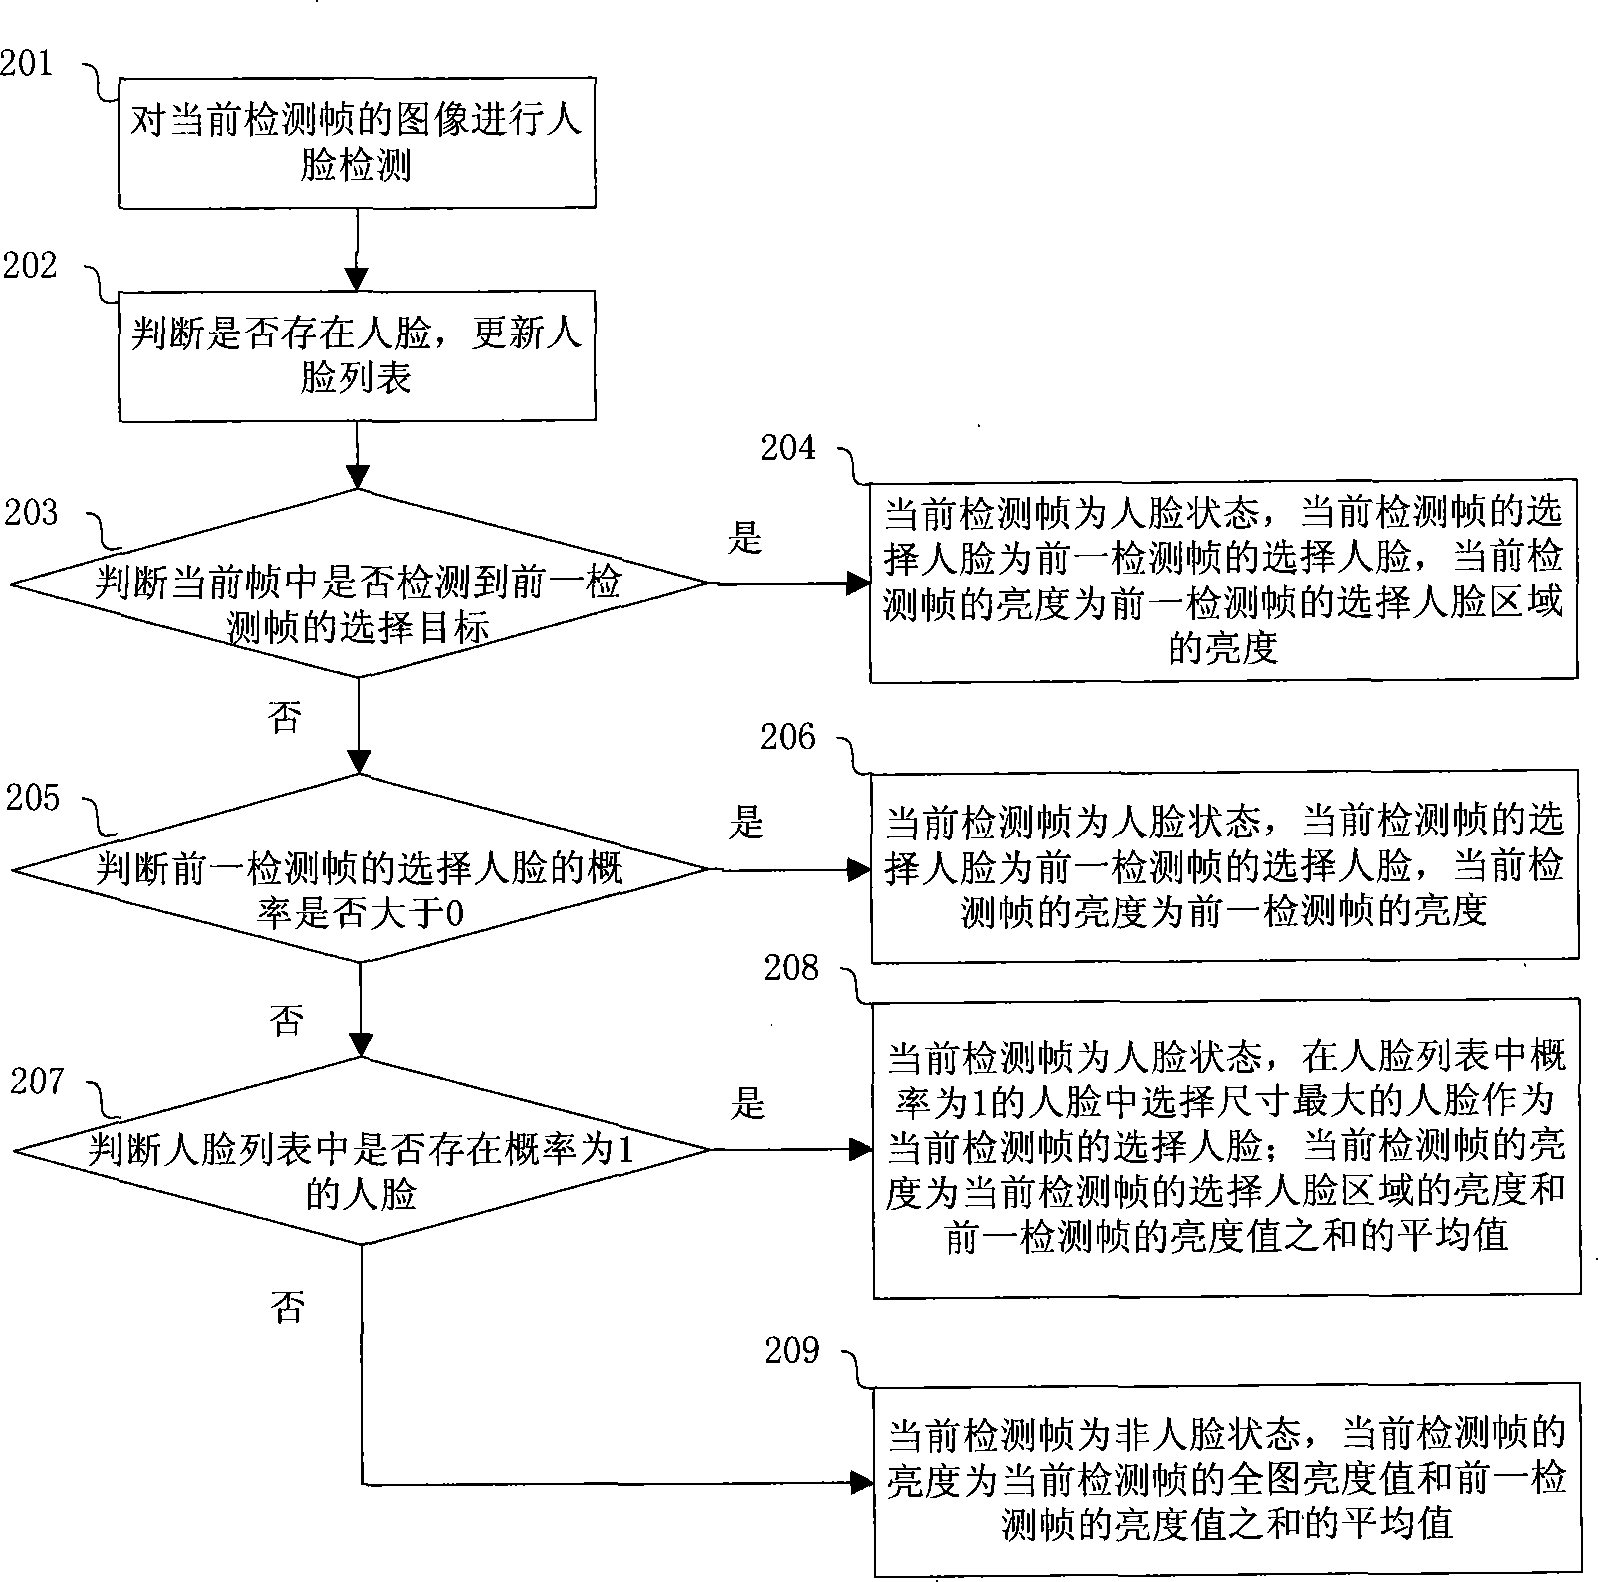 Automatic exposure method based on objective area in image